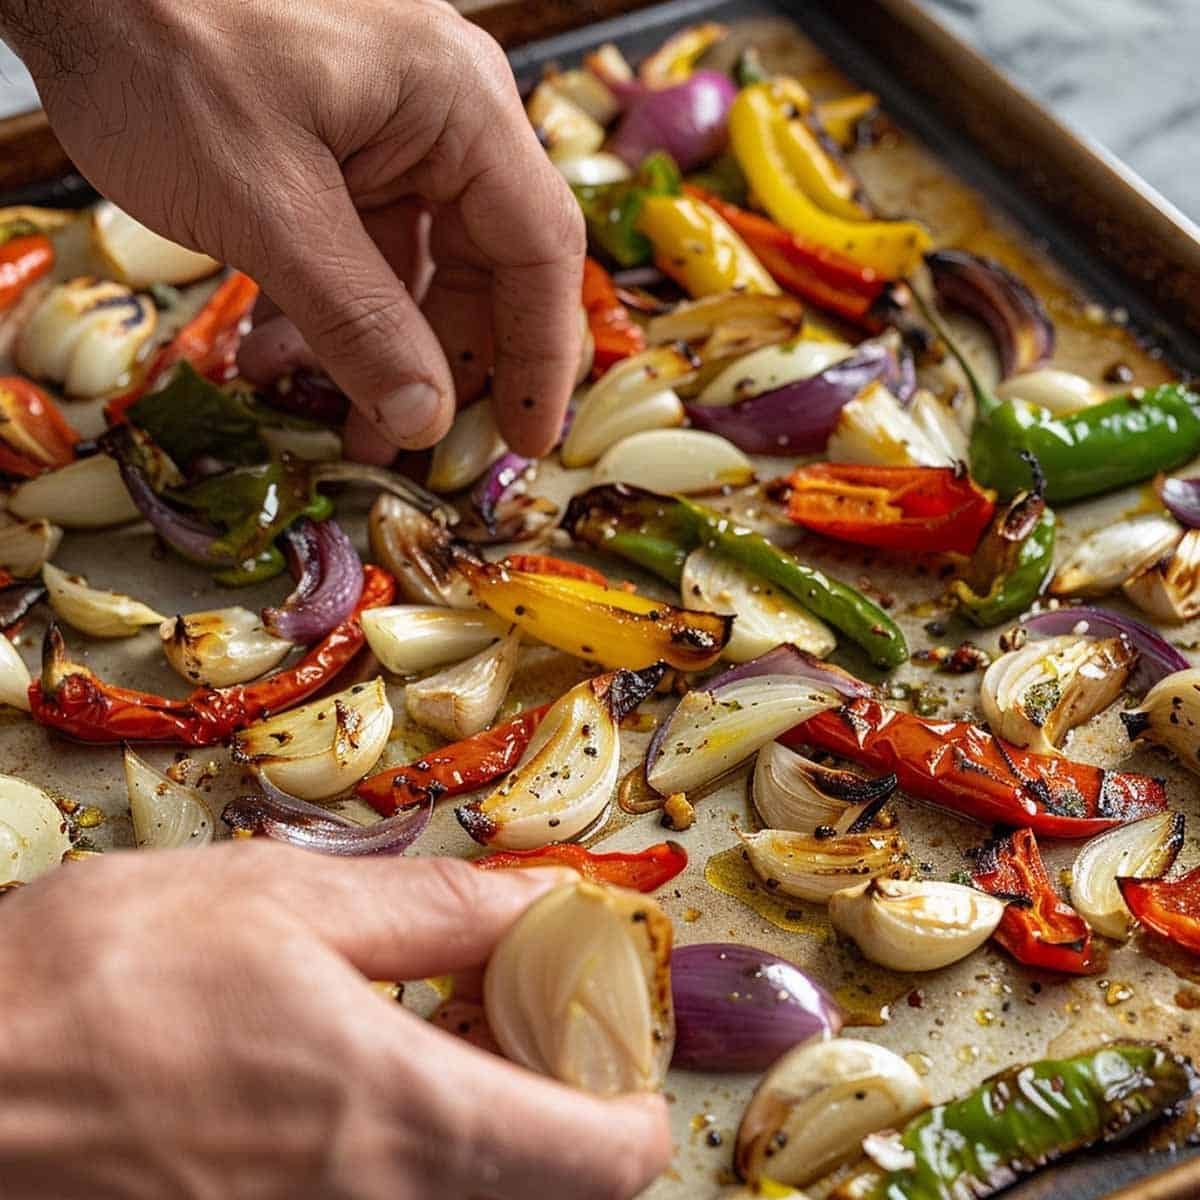 Hands peeling garlic and roasted vegetables, with a pan of roasted vegetables in the background for Thai chili dipping sauce